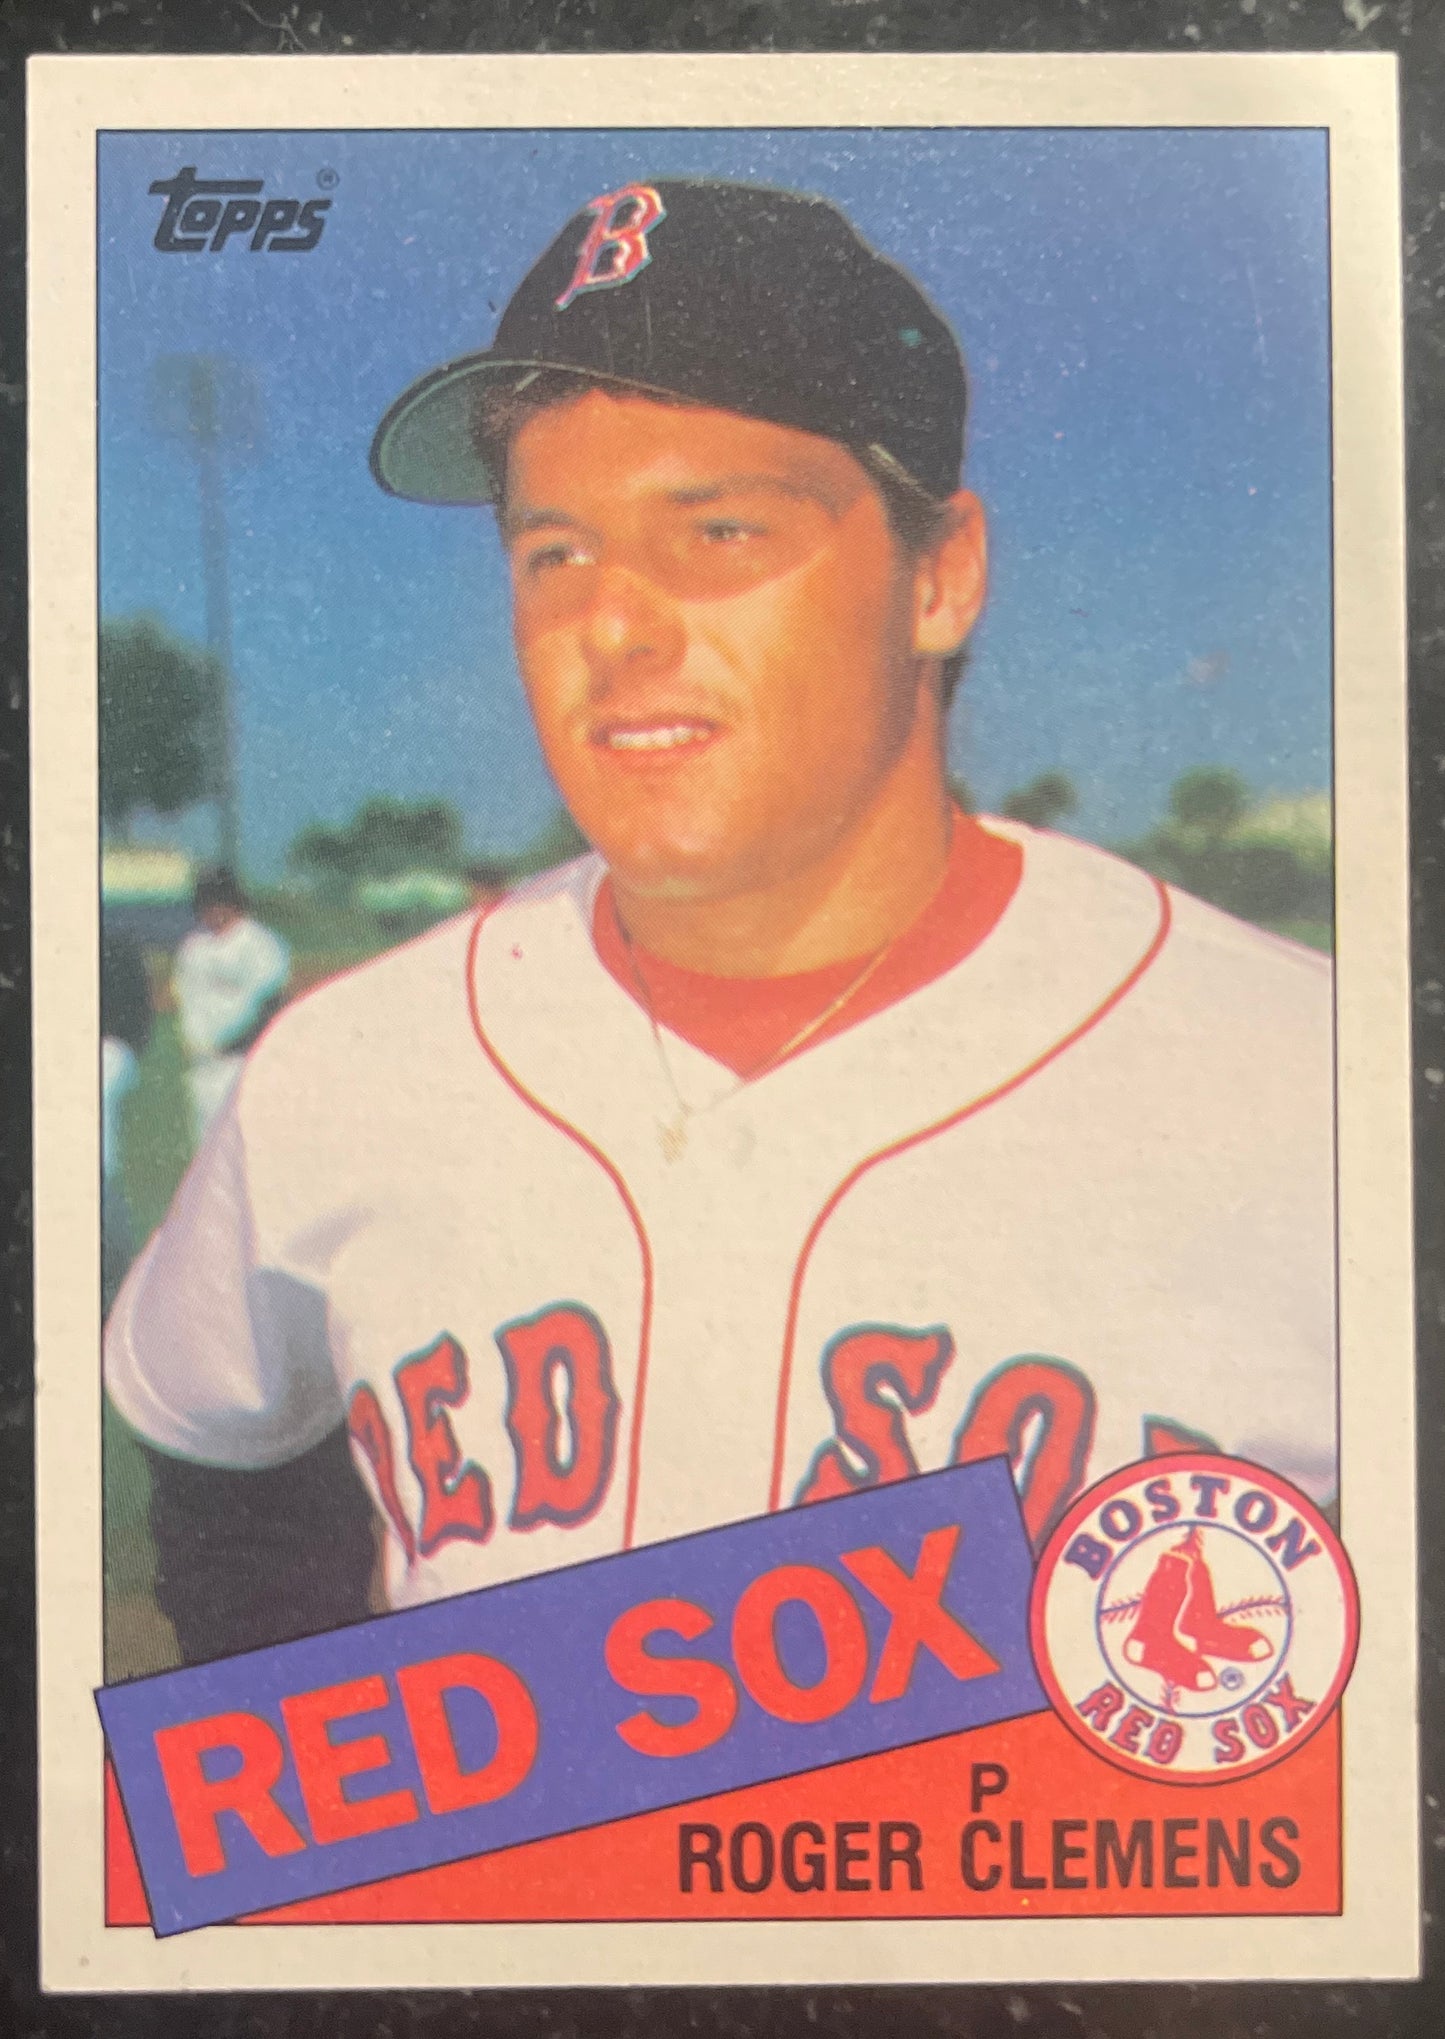 1985 Roger Clemens Rookie Card